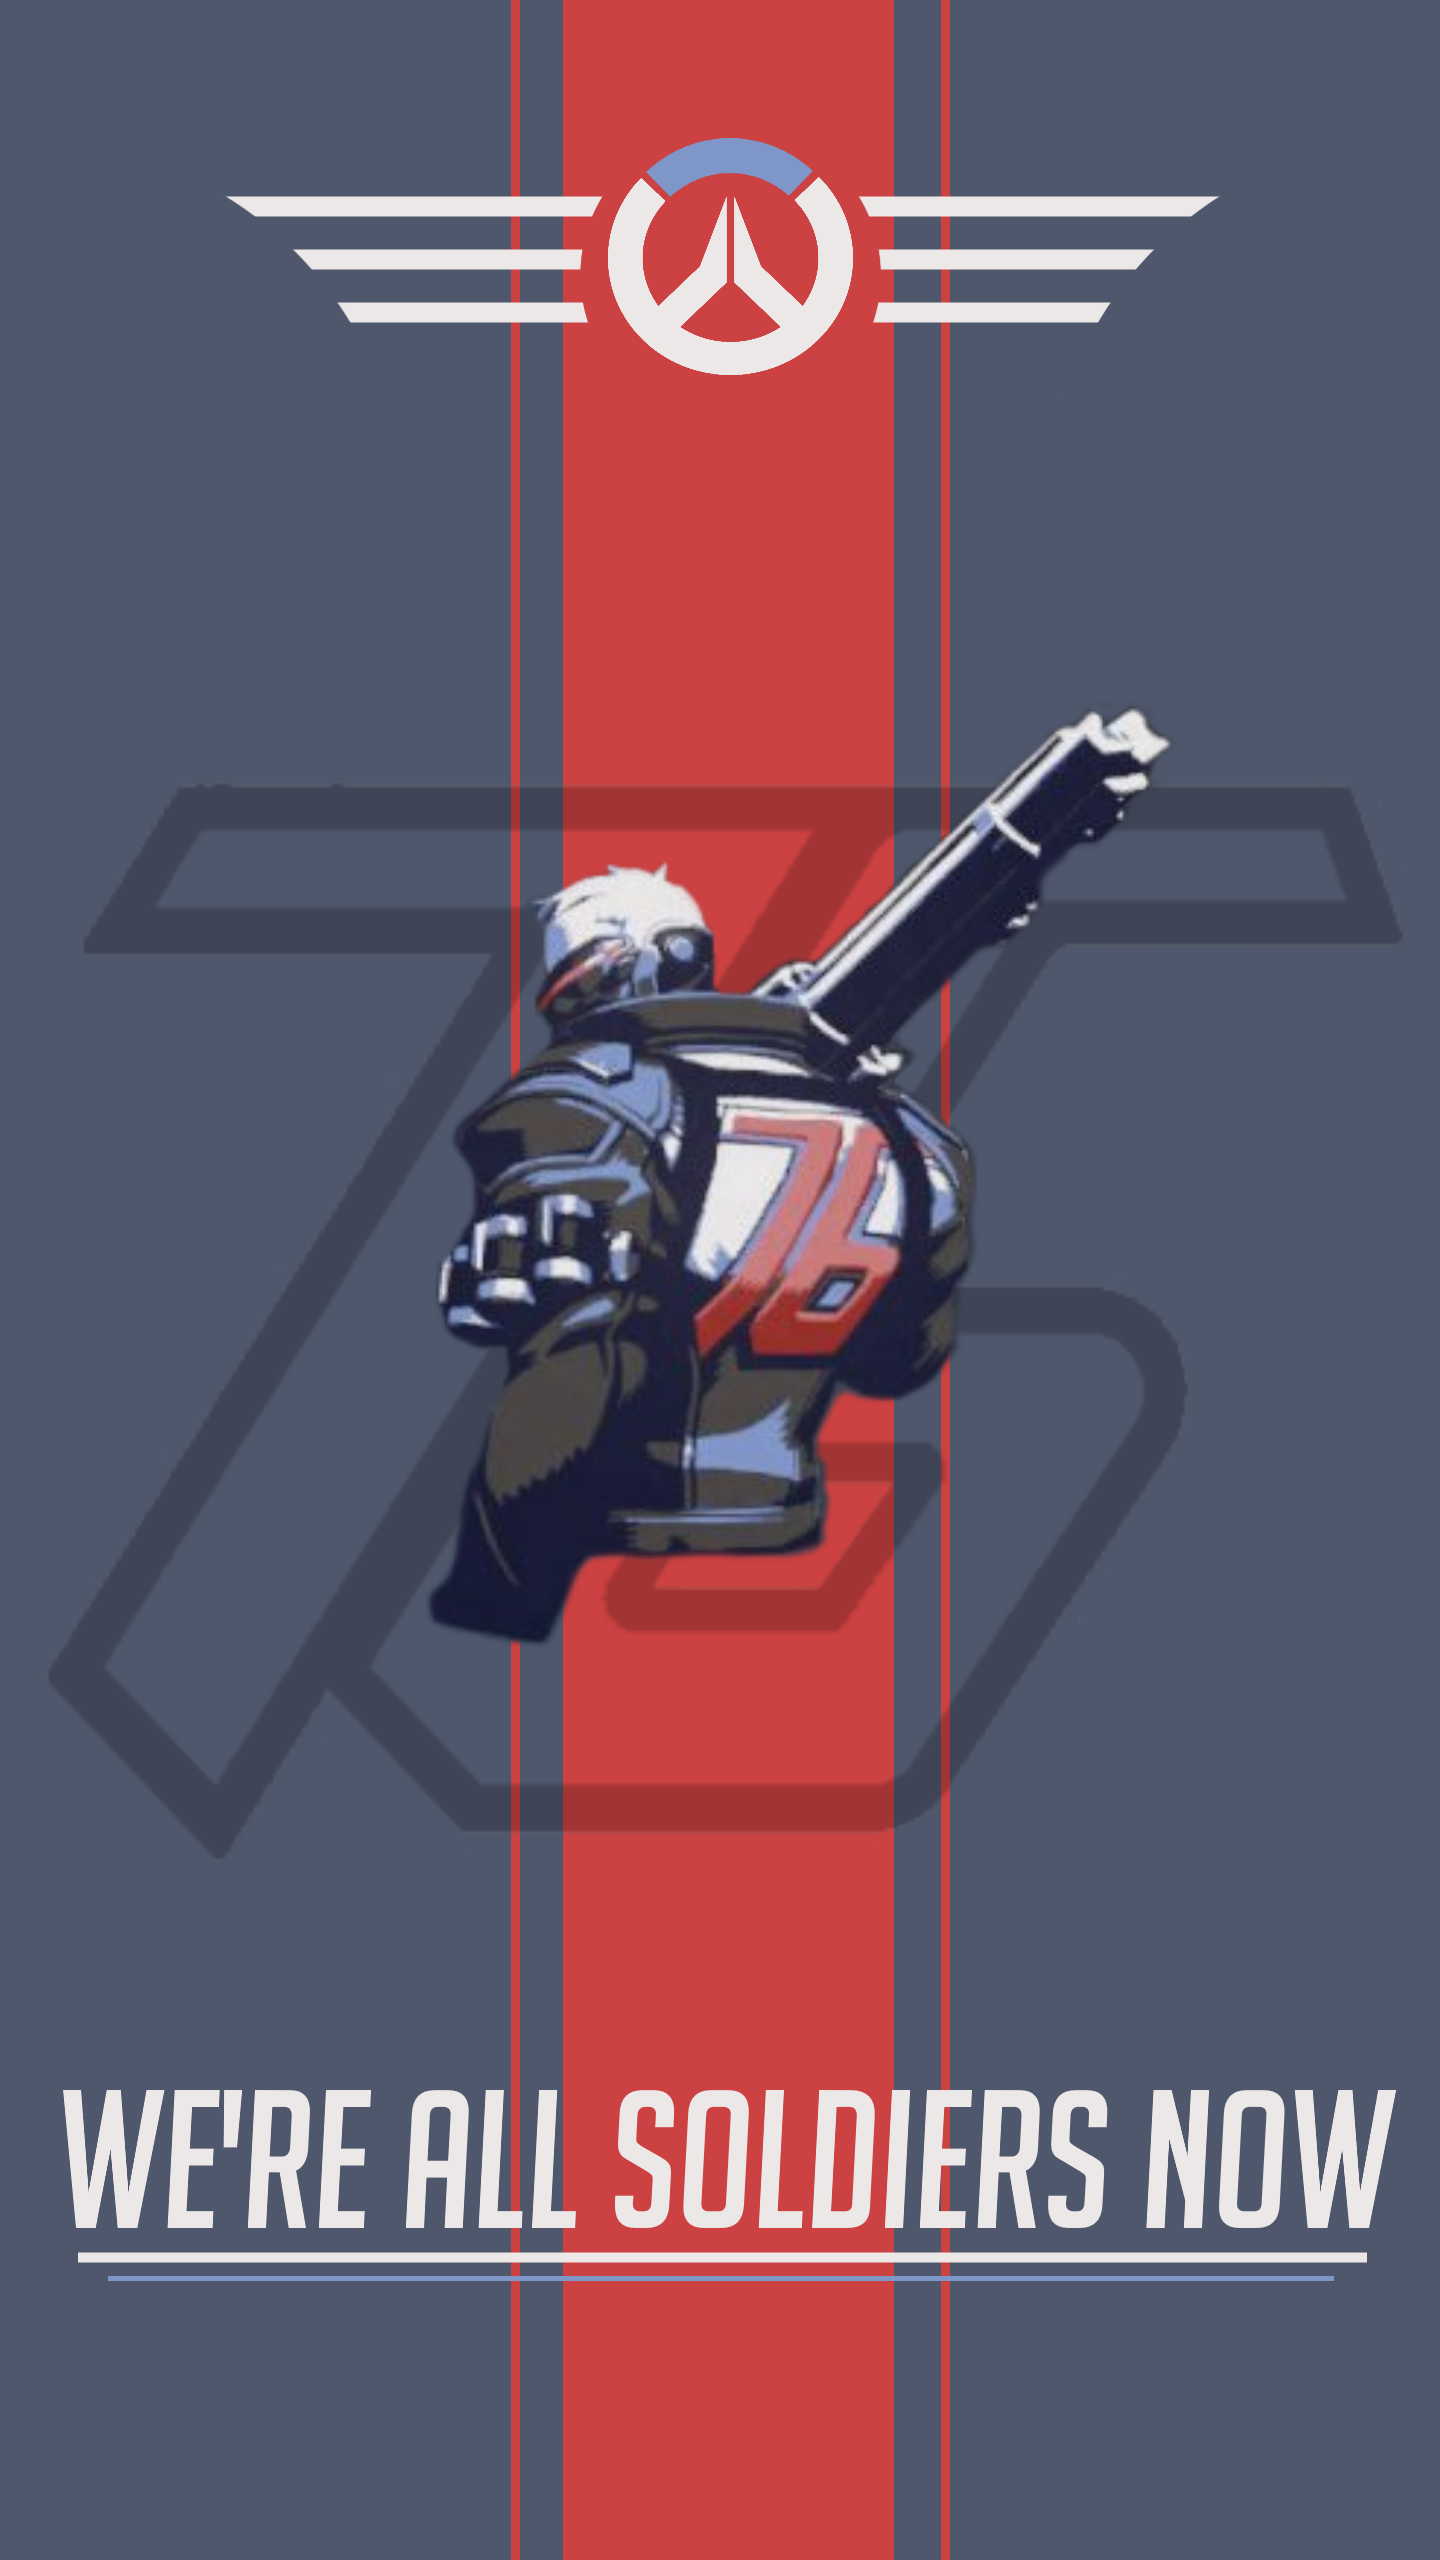 Soldier 76 Wallpapers